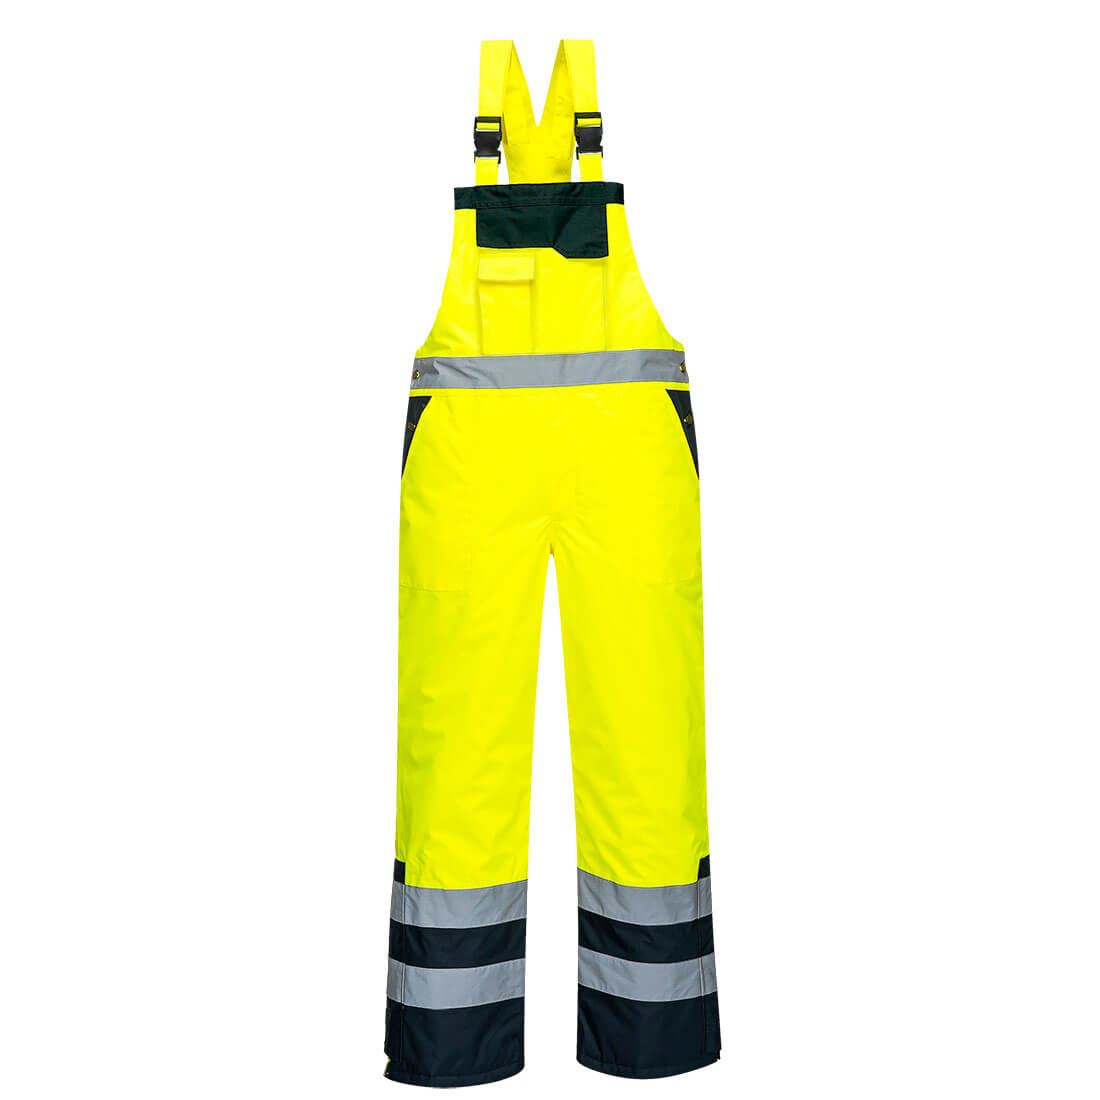 Portwest S489 - Contrast Bib and Brace - Lined